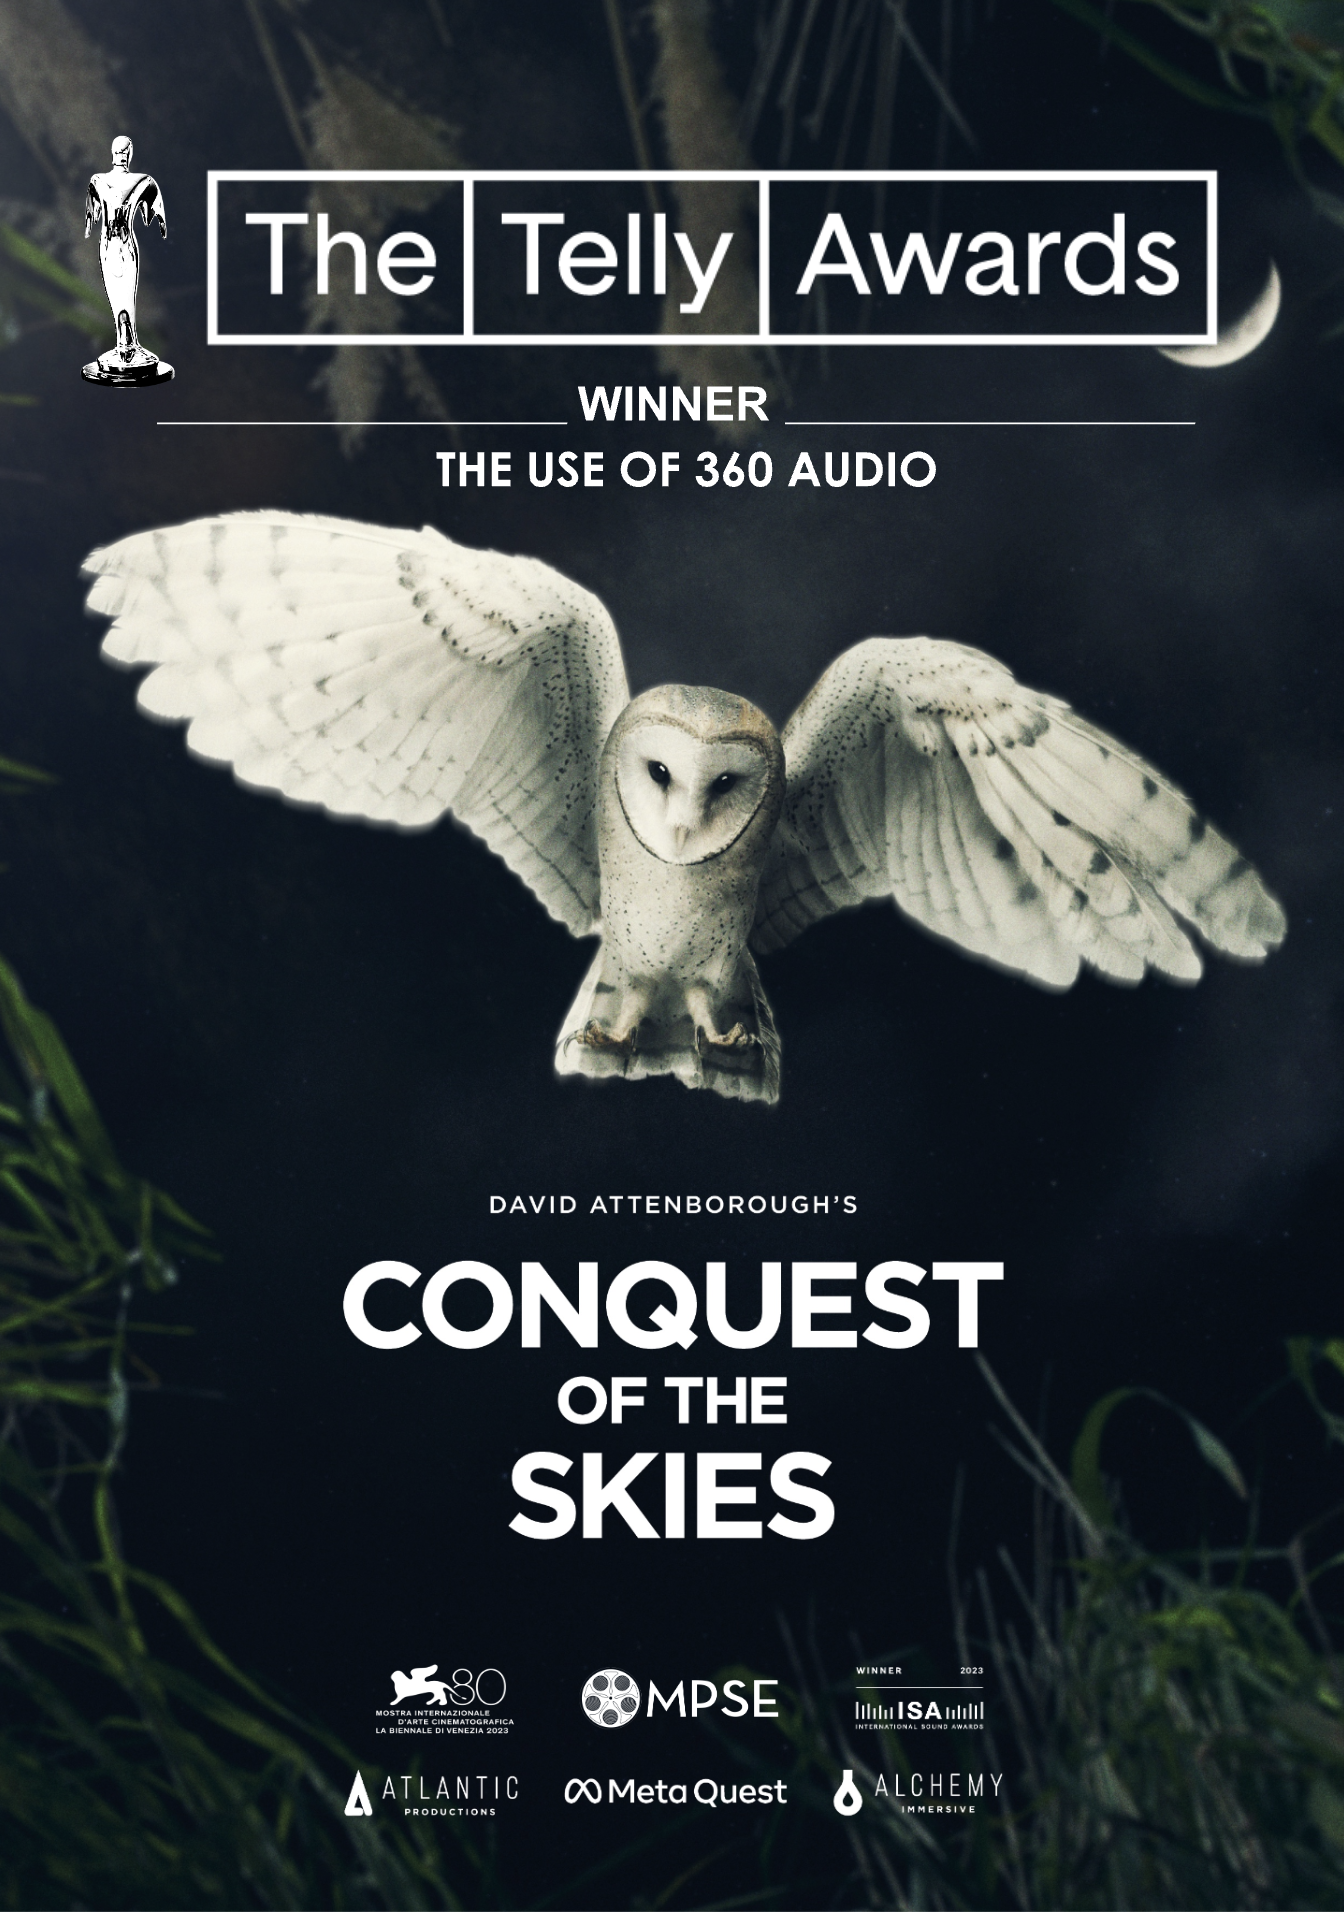 David Attenborough’s Conquest of the Skies 3-part VR series has just won The 45th Annual Telly Awards in the Use of 360 Audio Category.